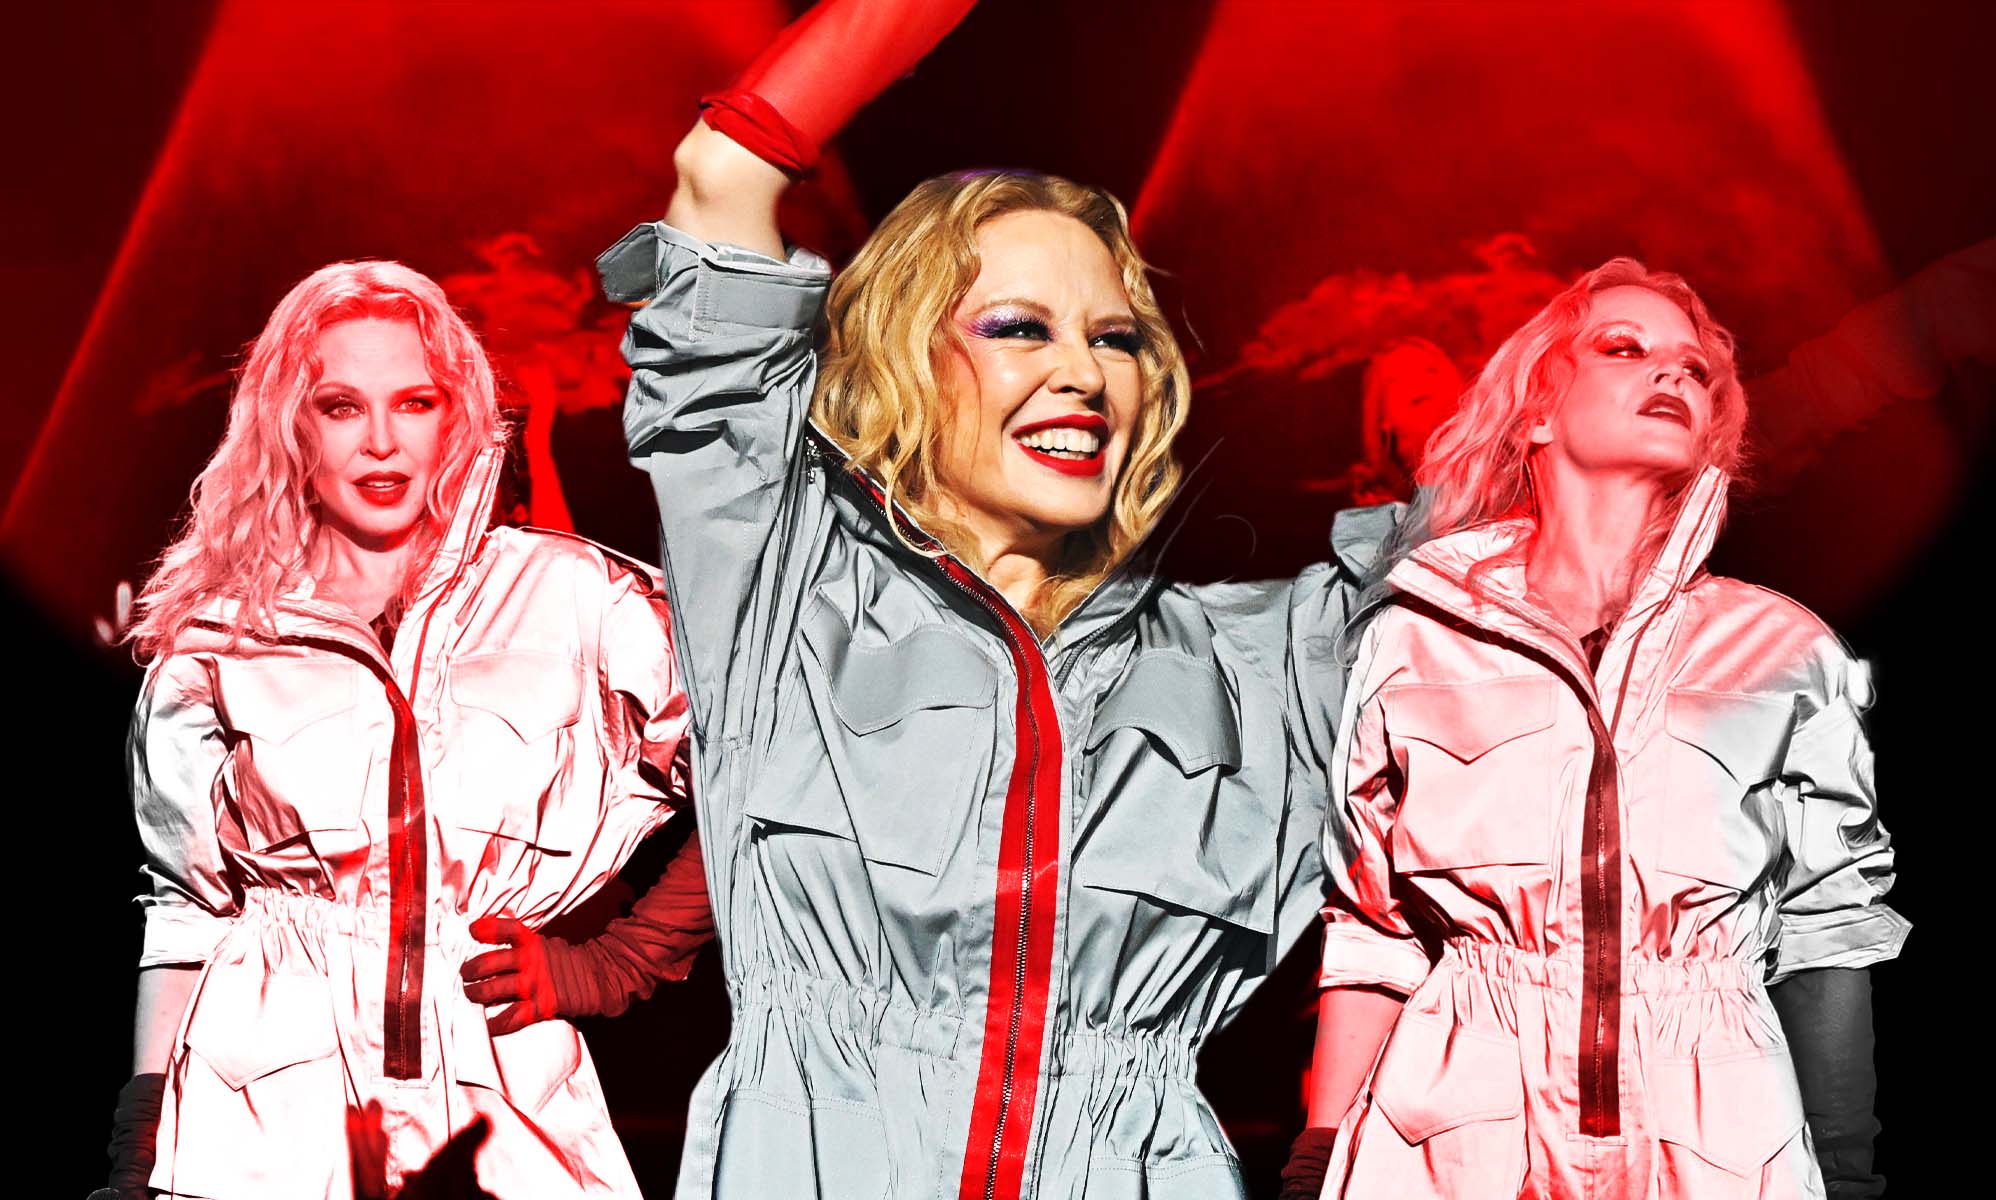 Kylie Minogue announces vegas residency 'Voltaire' - Page 2 - Entertainment  - BreatheHeavy